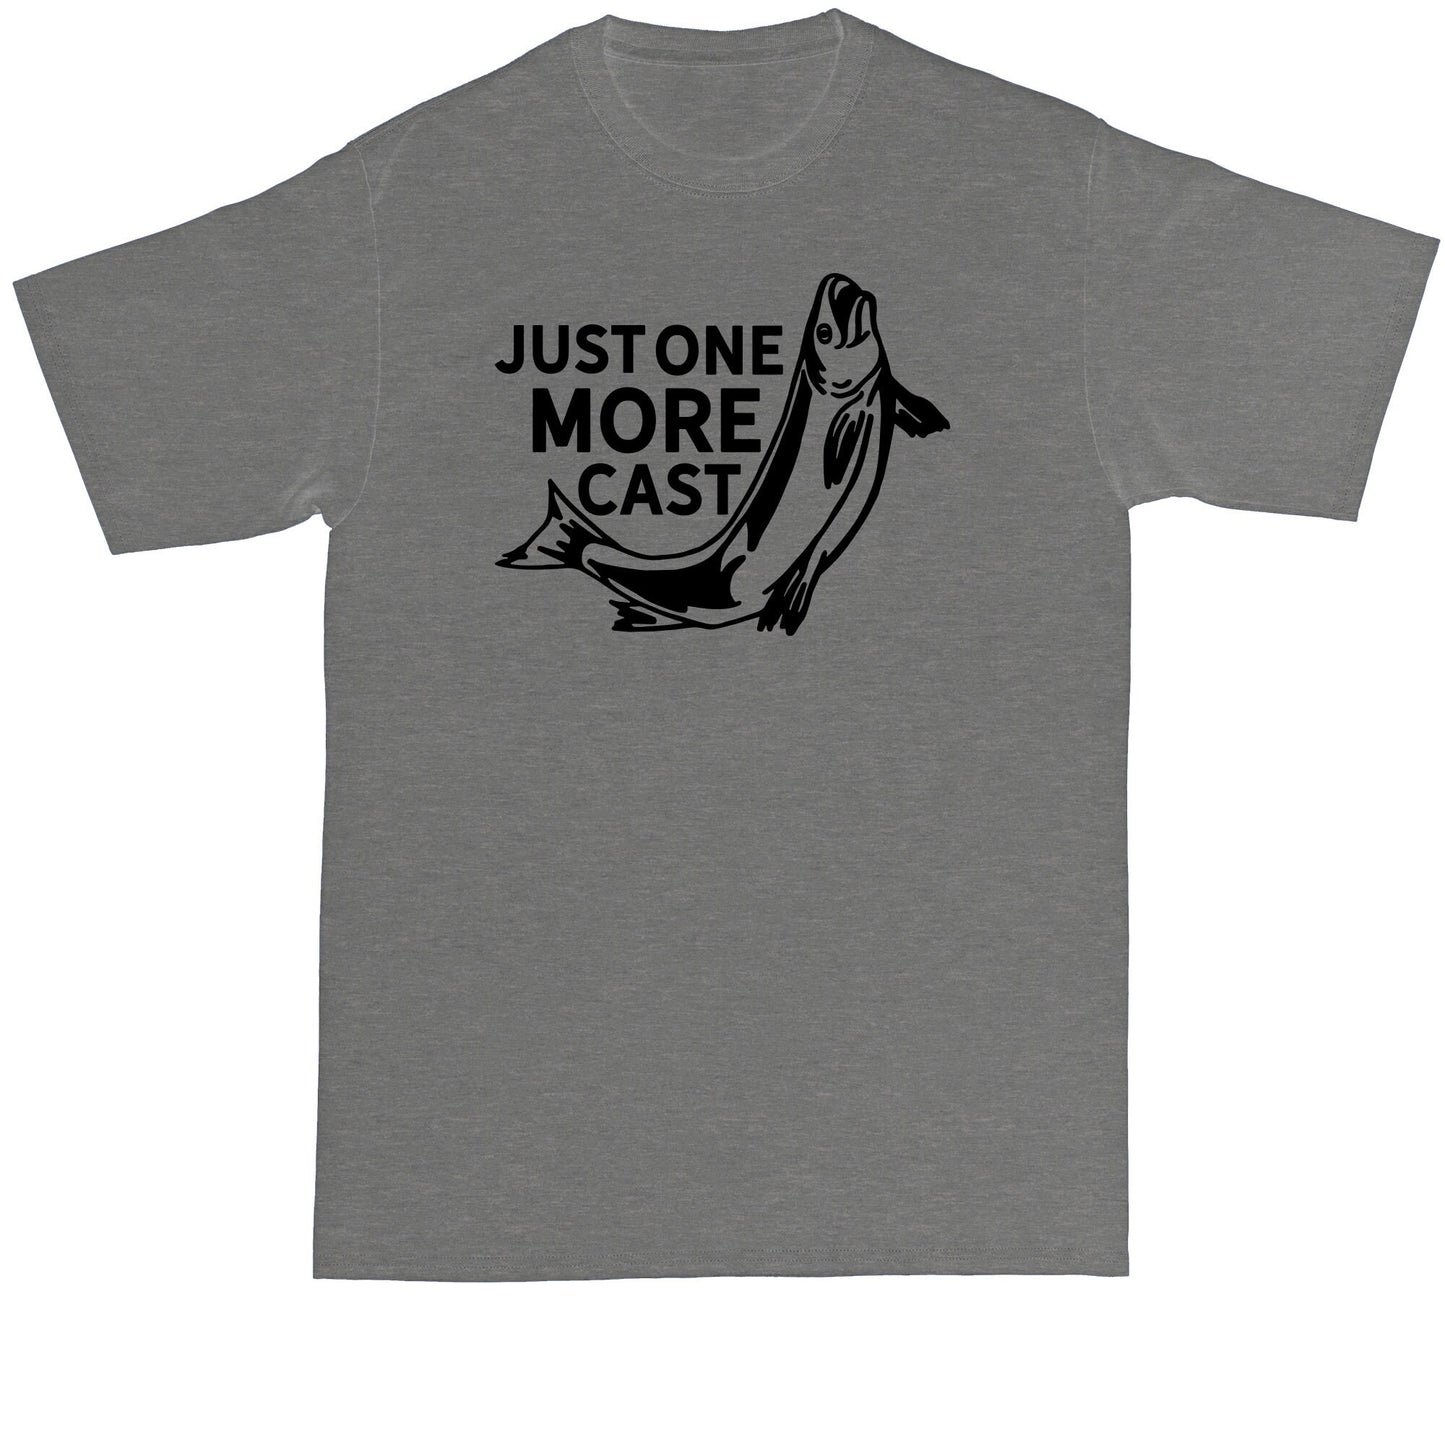 Just One More Cast | Fishing Shirt | Mens Big and Tall T-Shirt